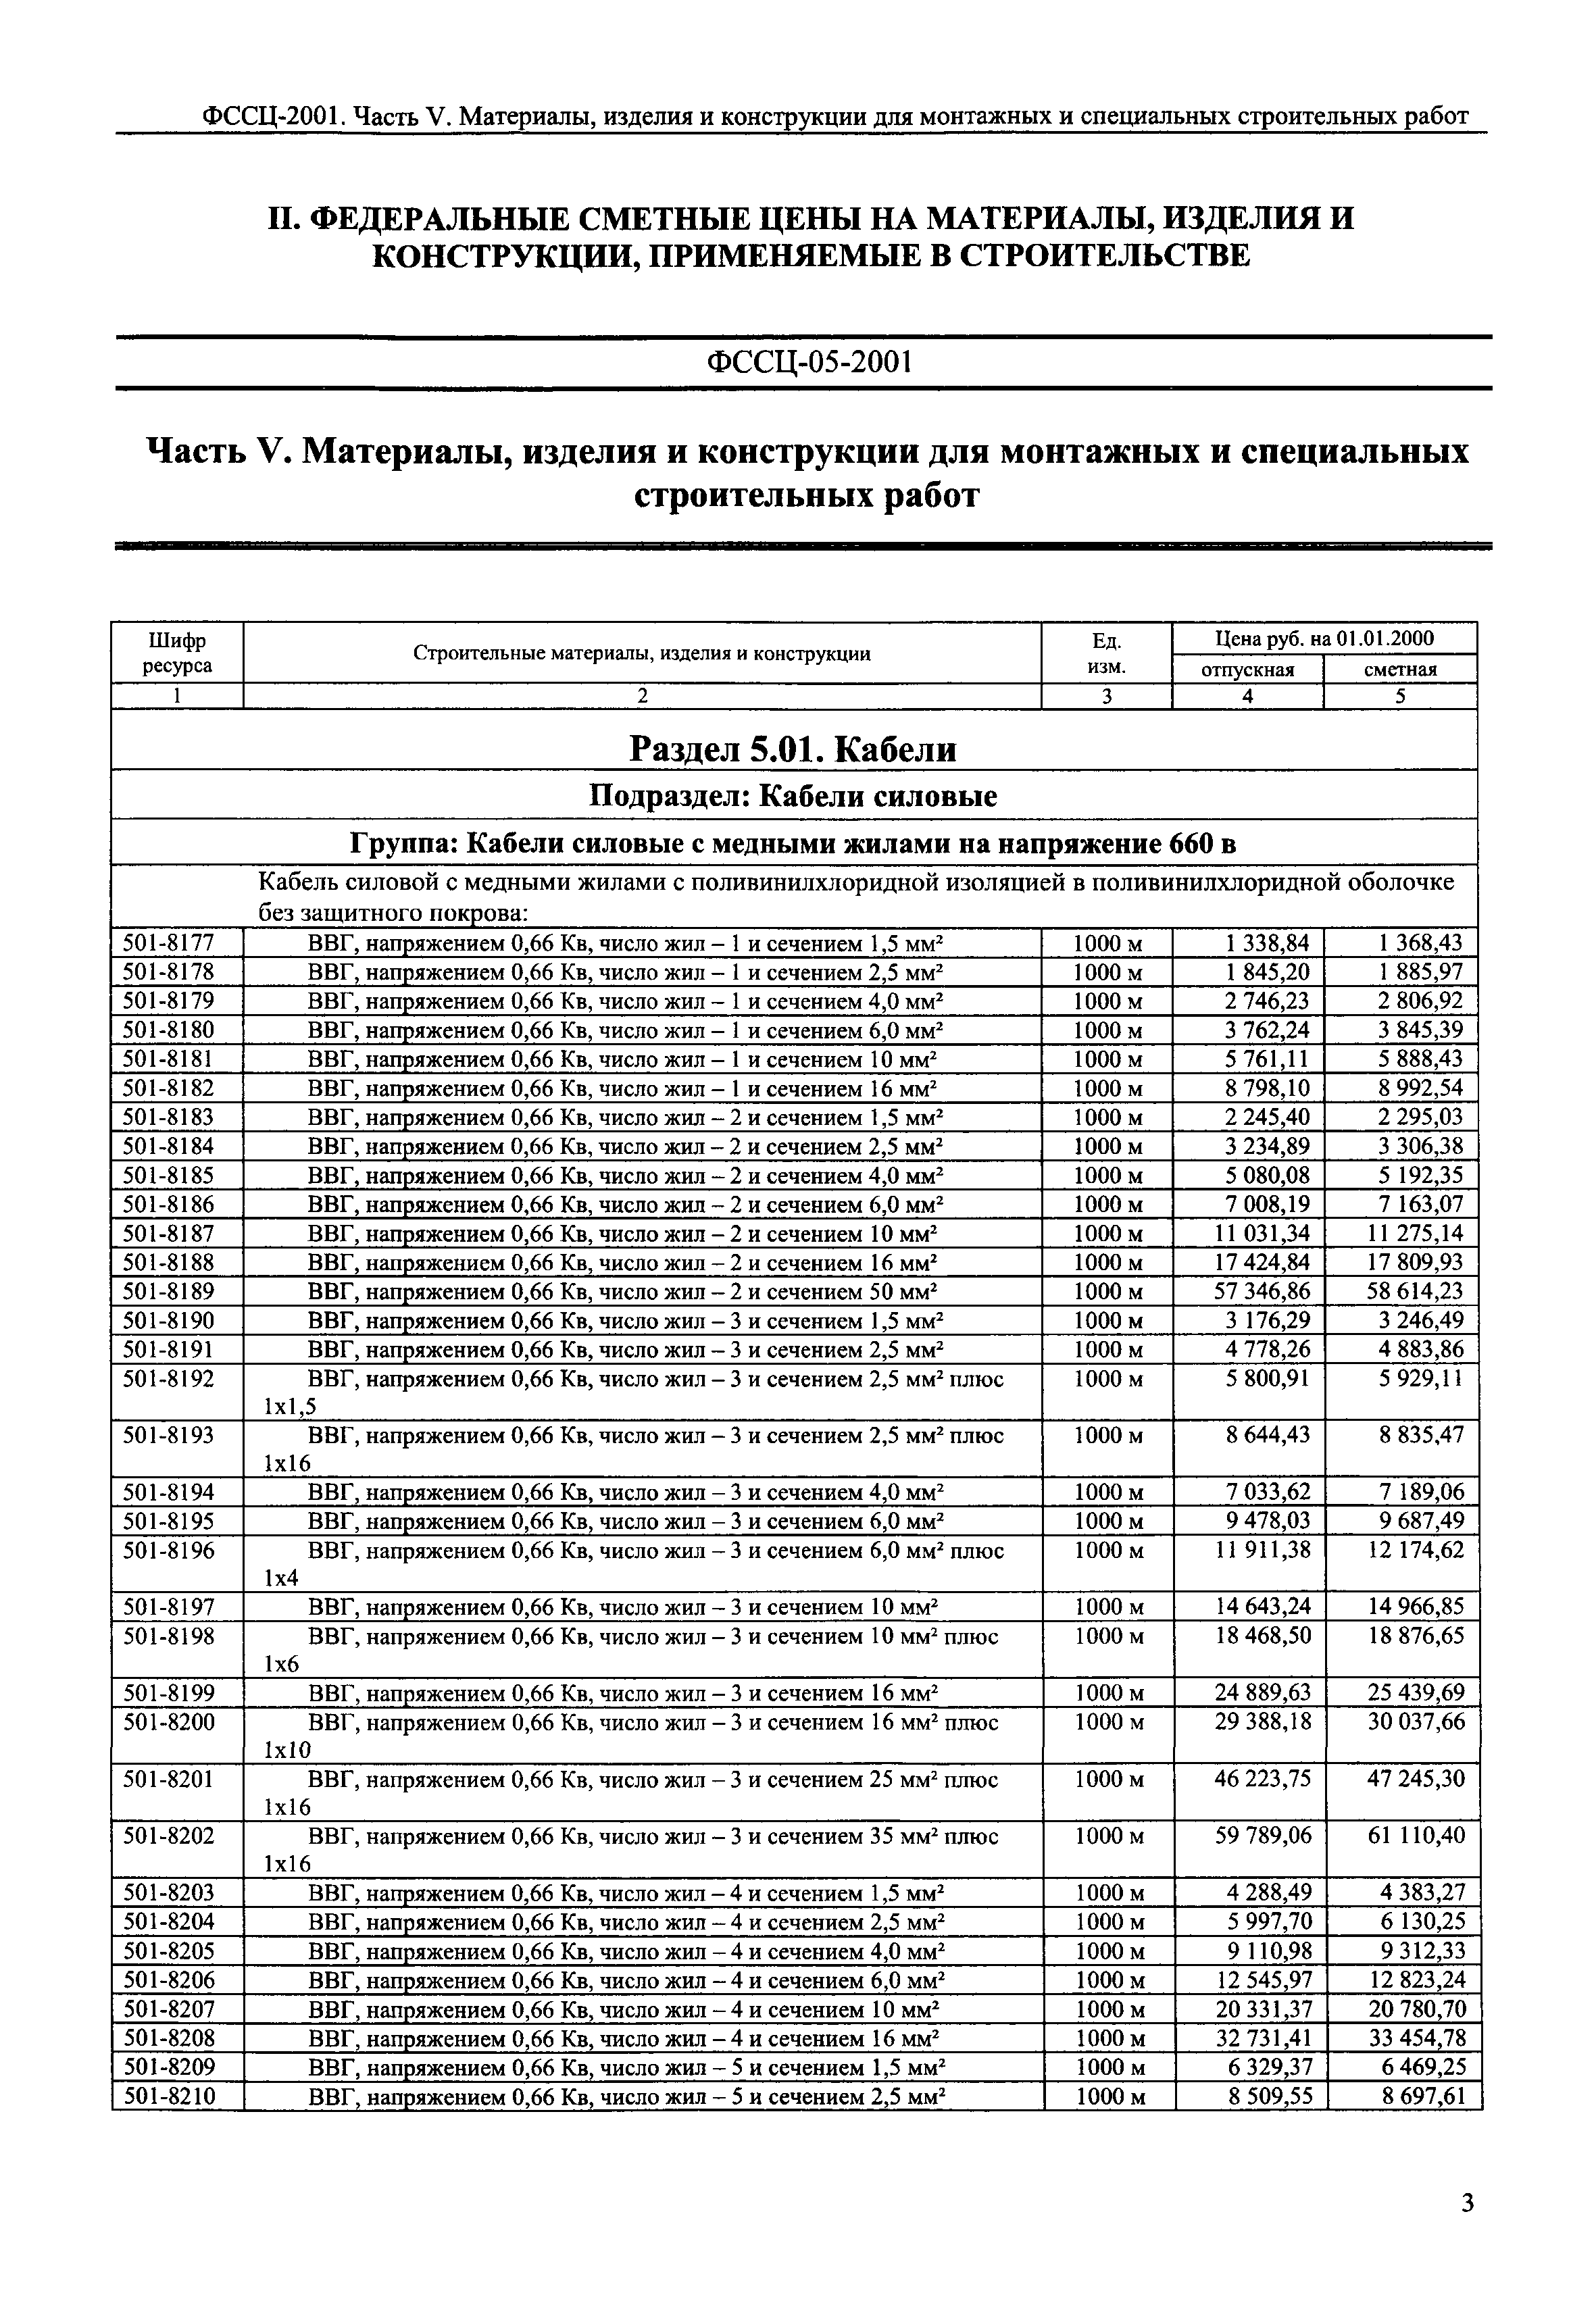 ФССЦ 05-2001